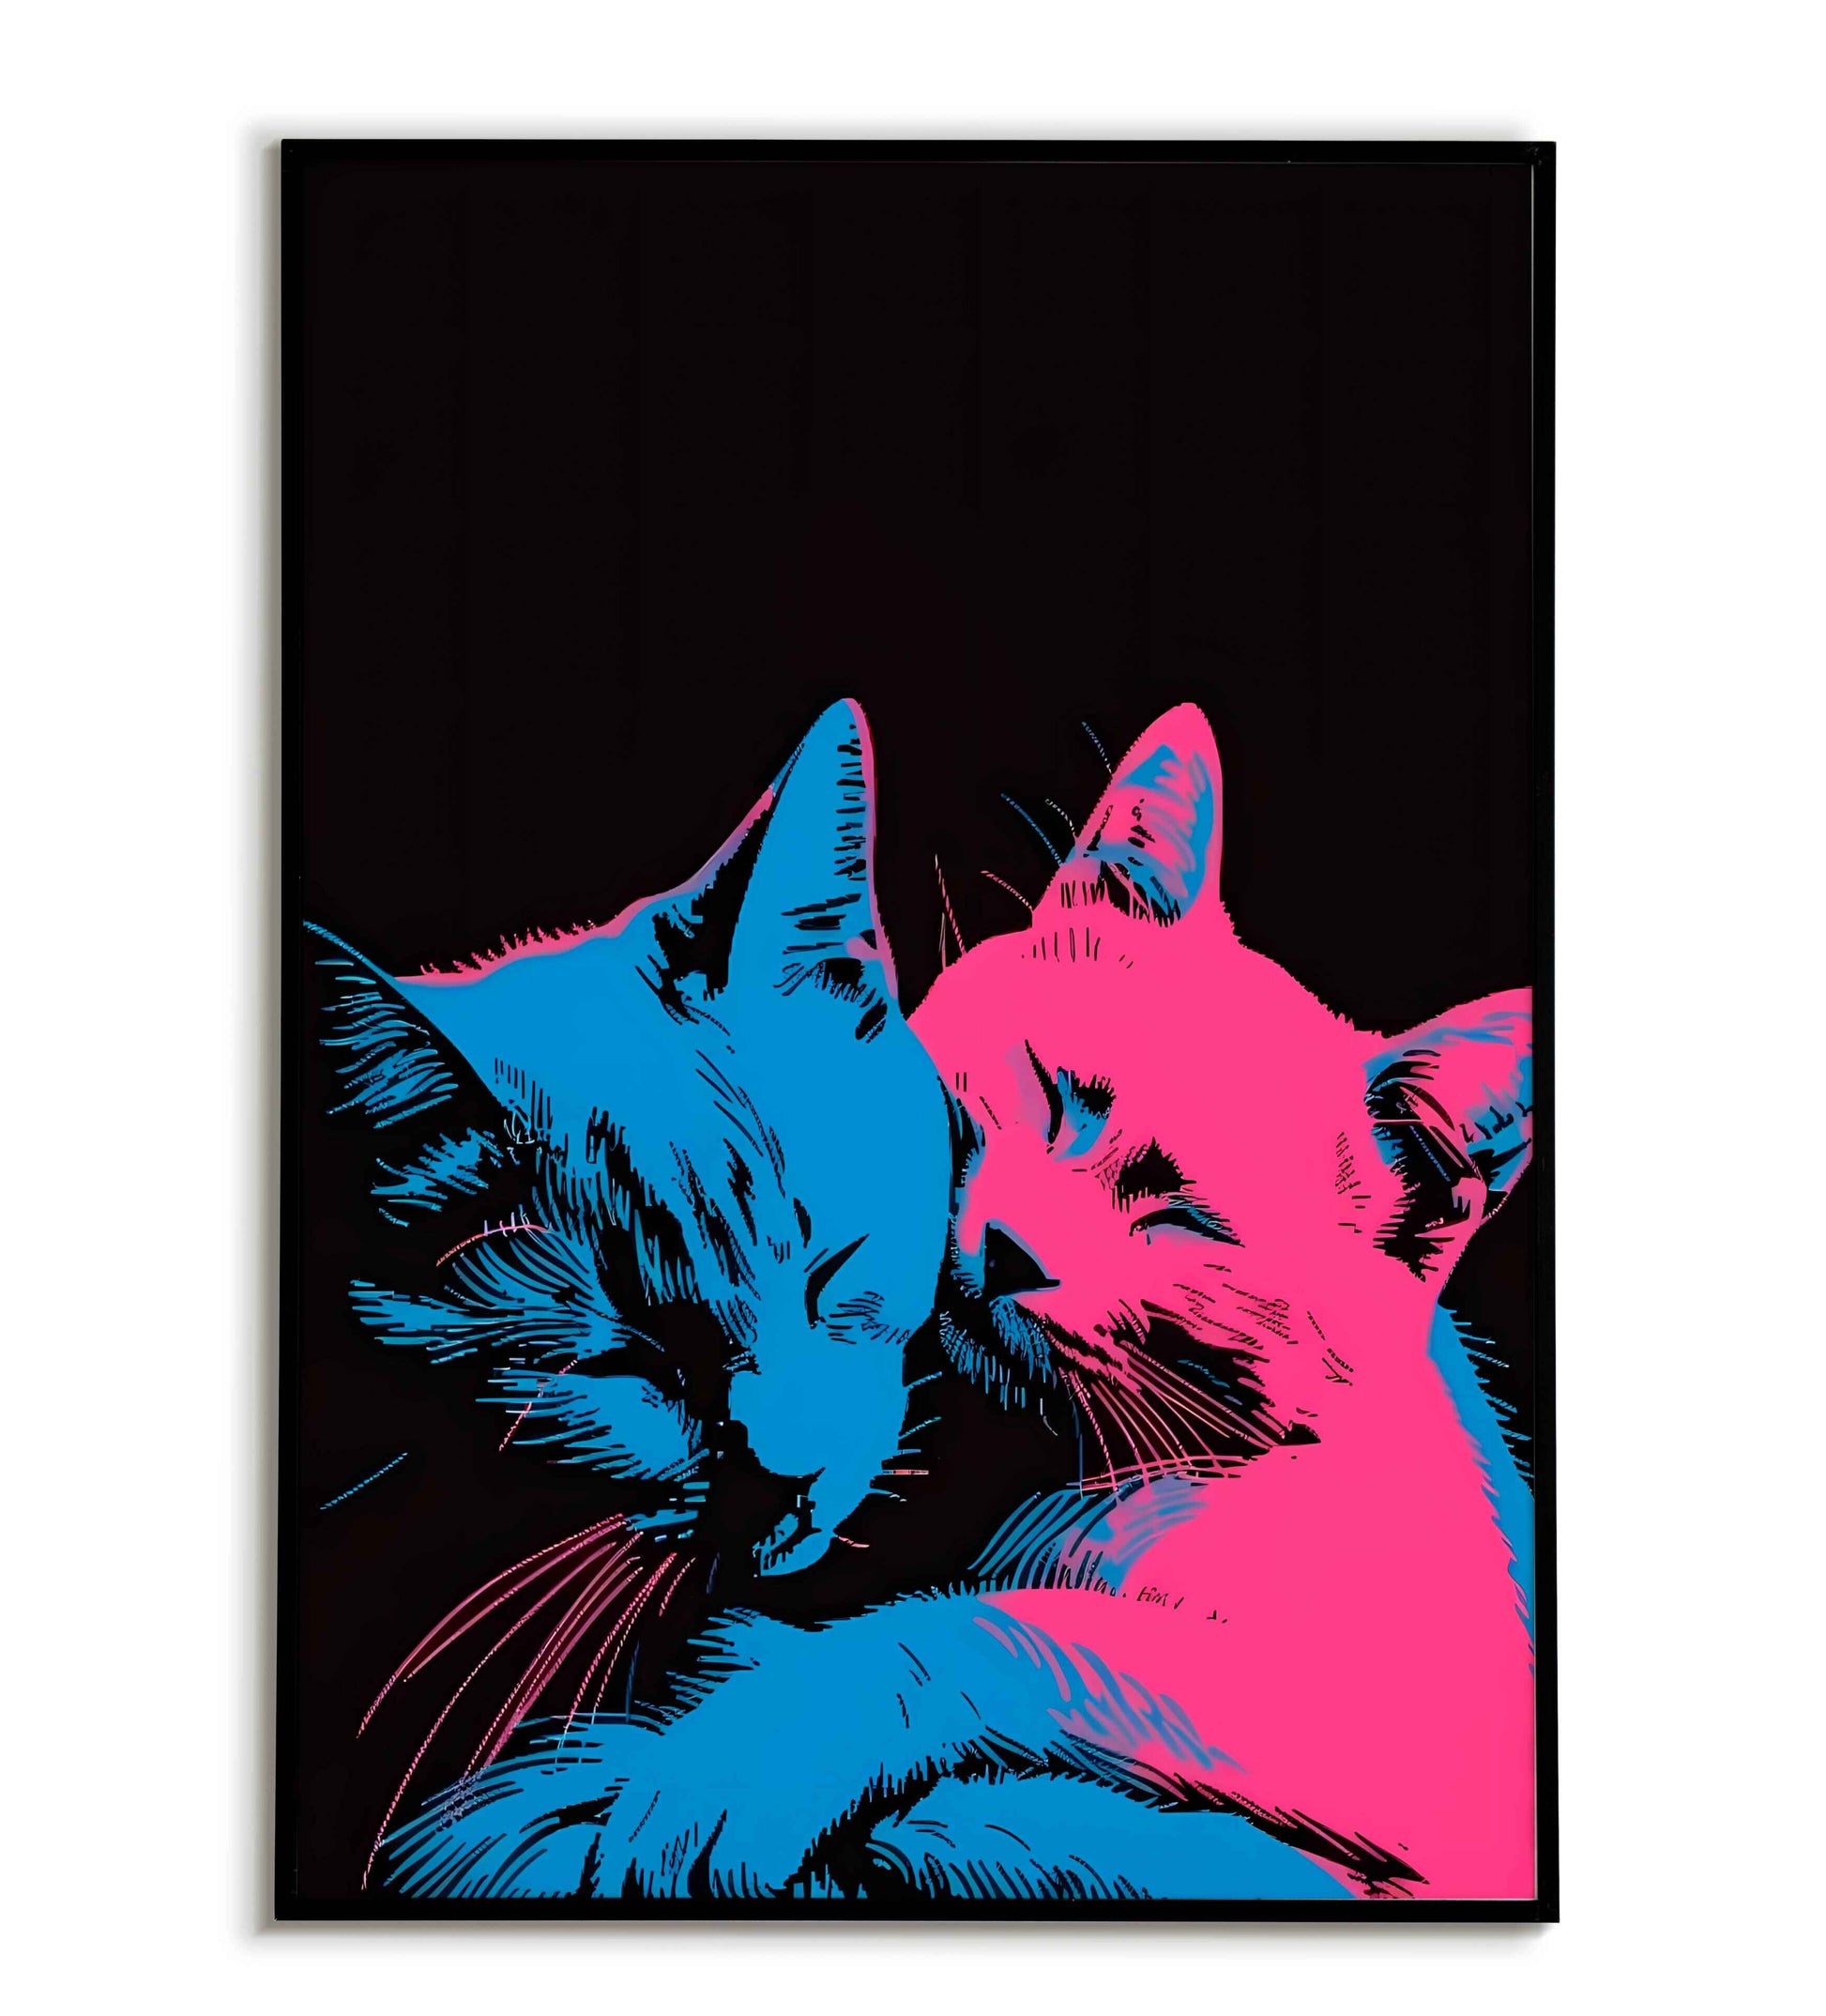 Cuddling Cats printable poster. Purrfect Companions: Two cuddly cats nestled together in a heartwarming scene. Available for purchase as a physical poster or digital download.